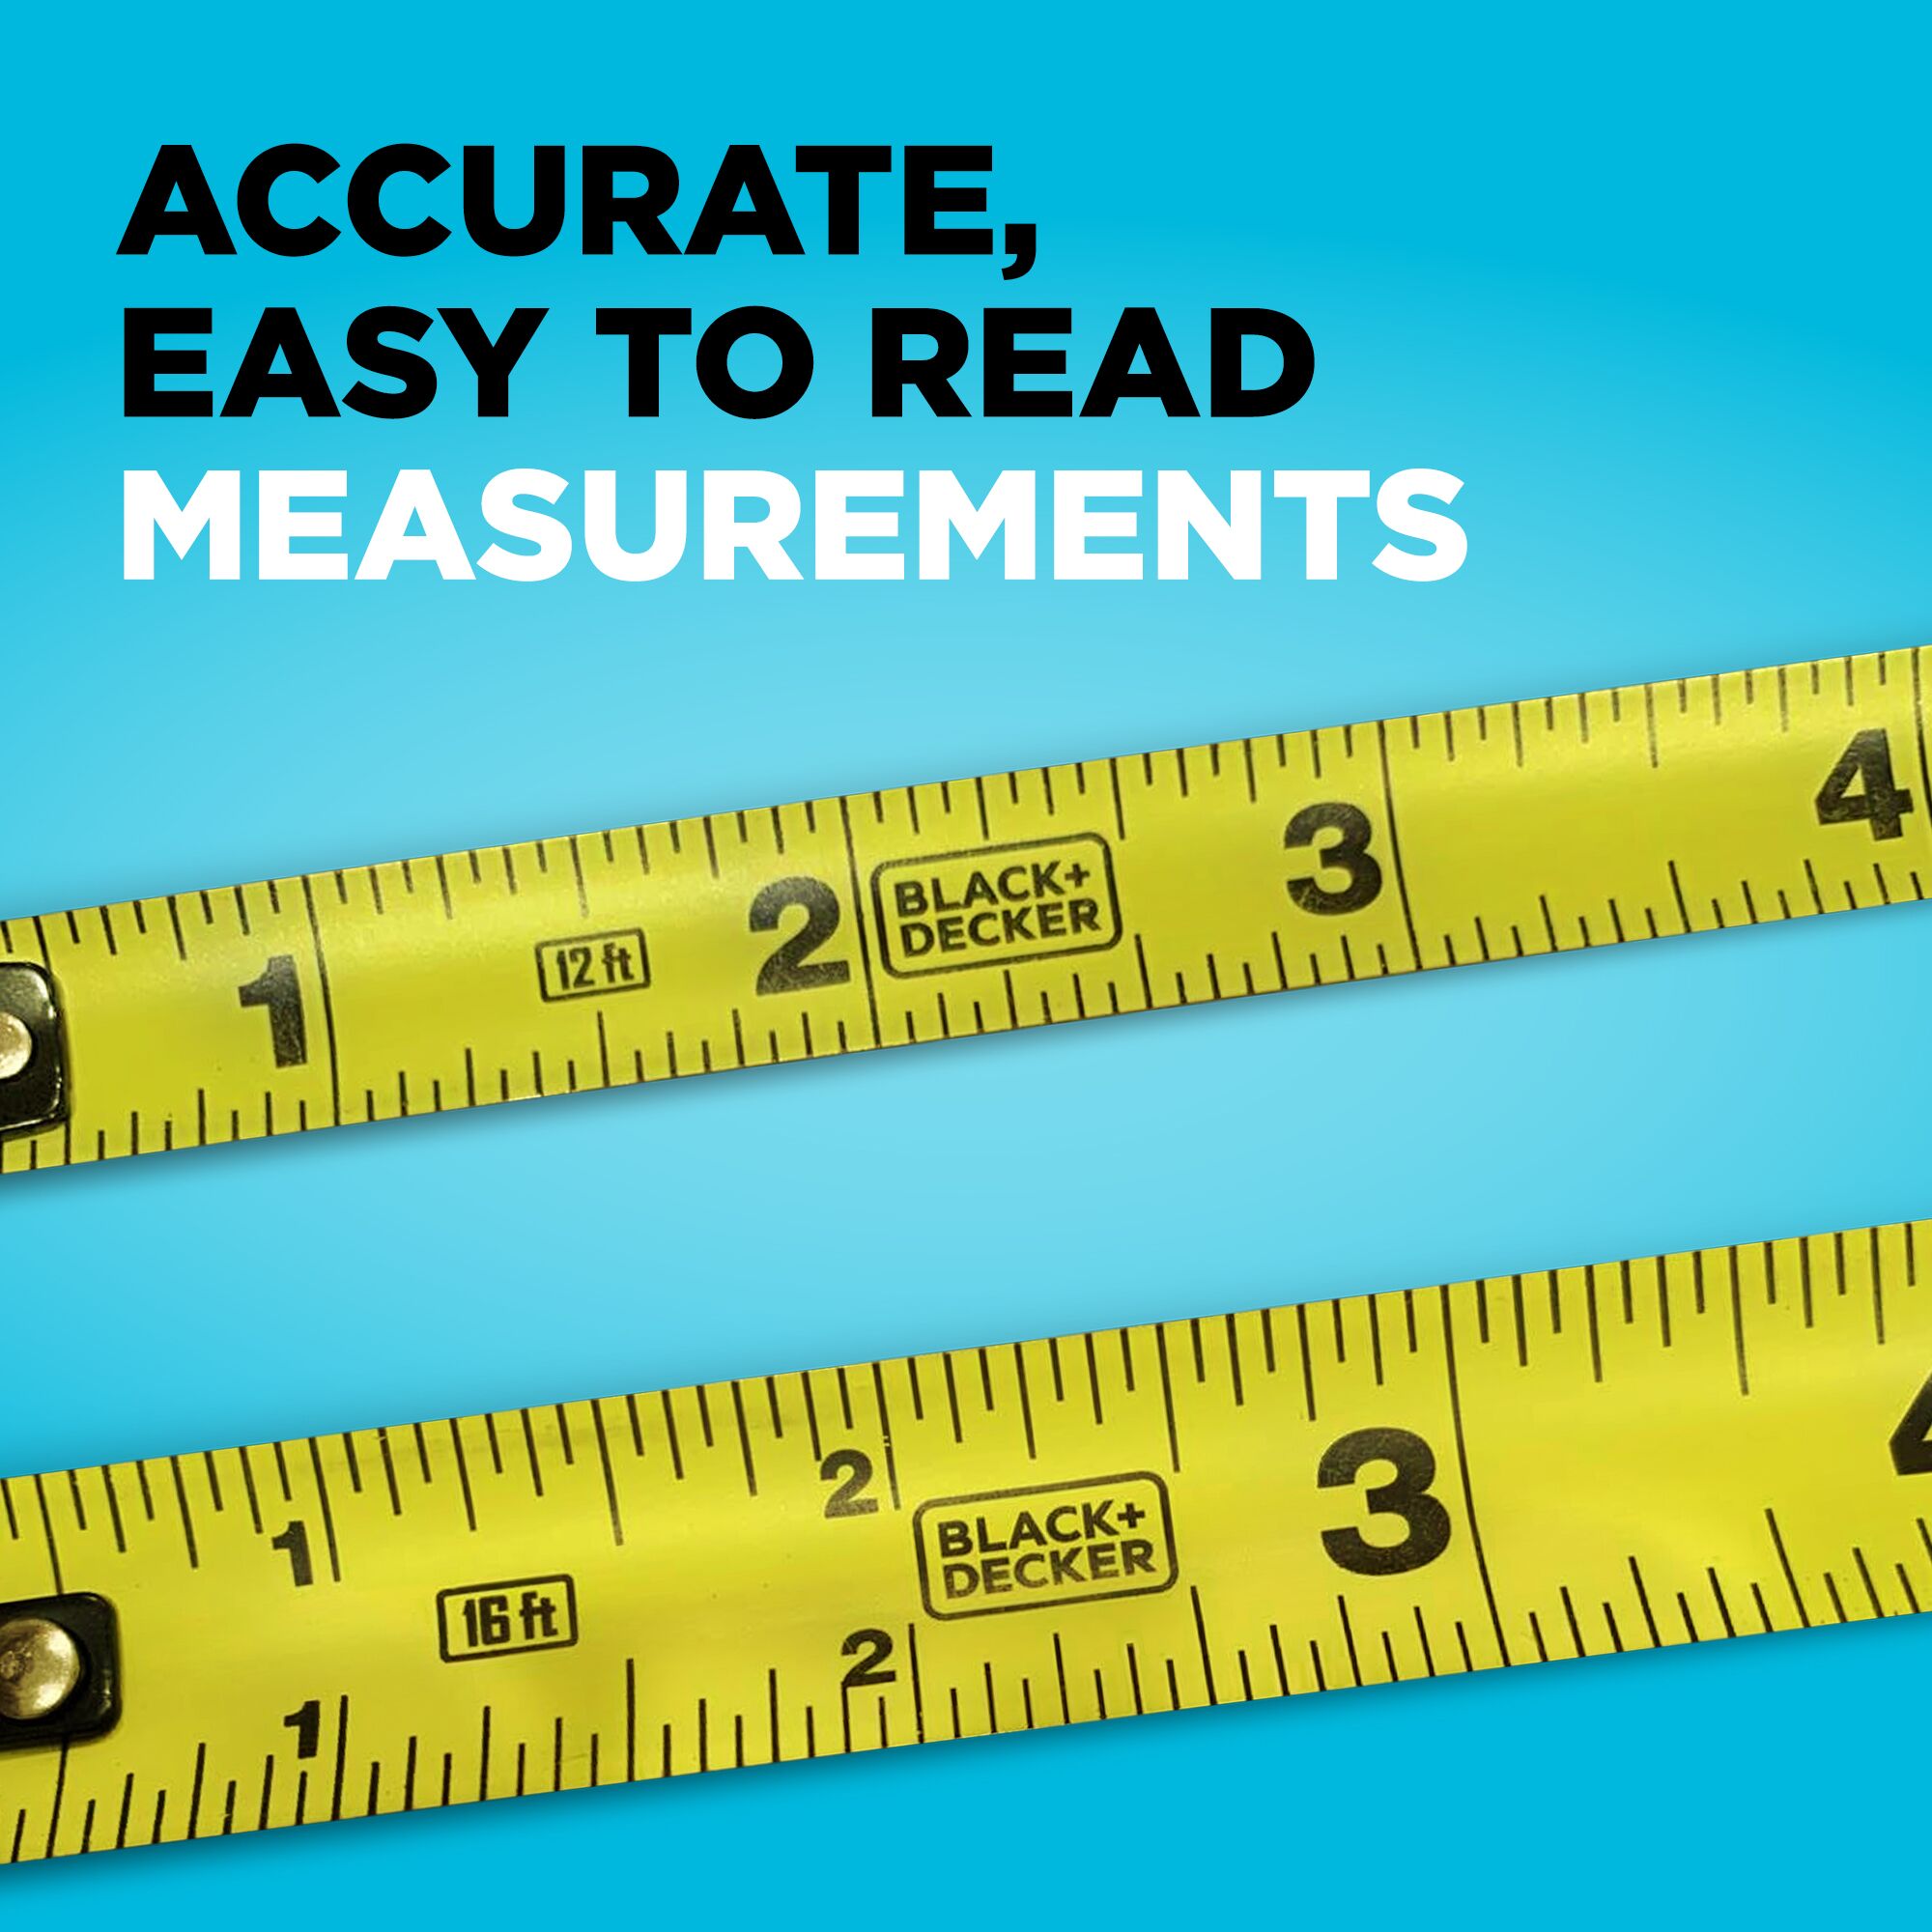 BLACK+DECKER 12 ft. and 16 ft. Tape Measure accurate, easy to read measurements